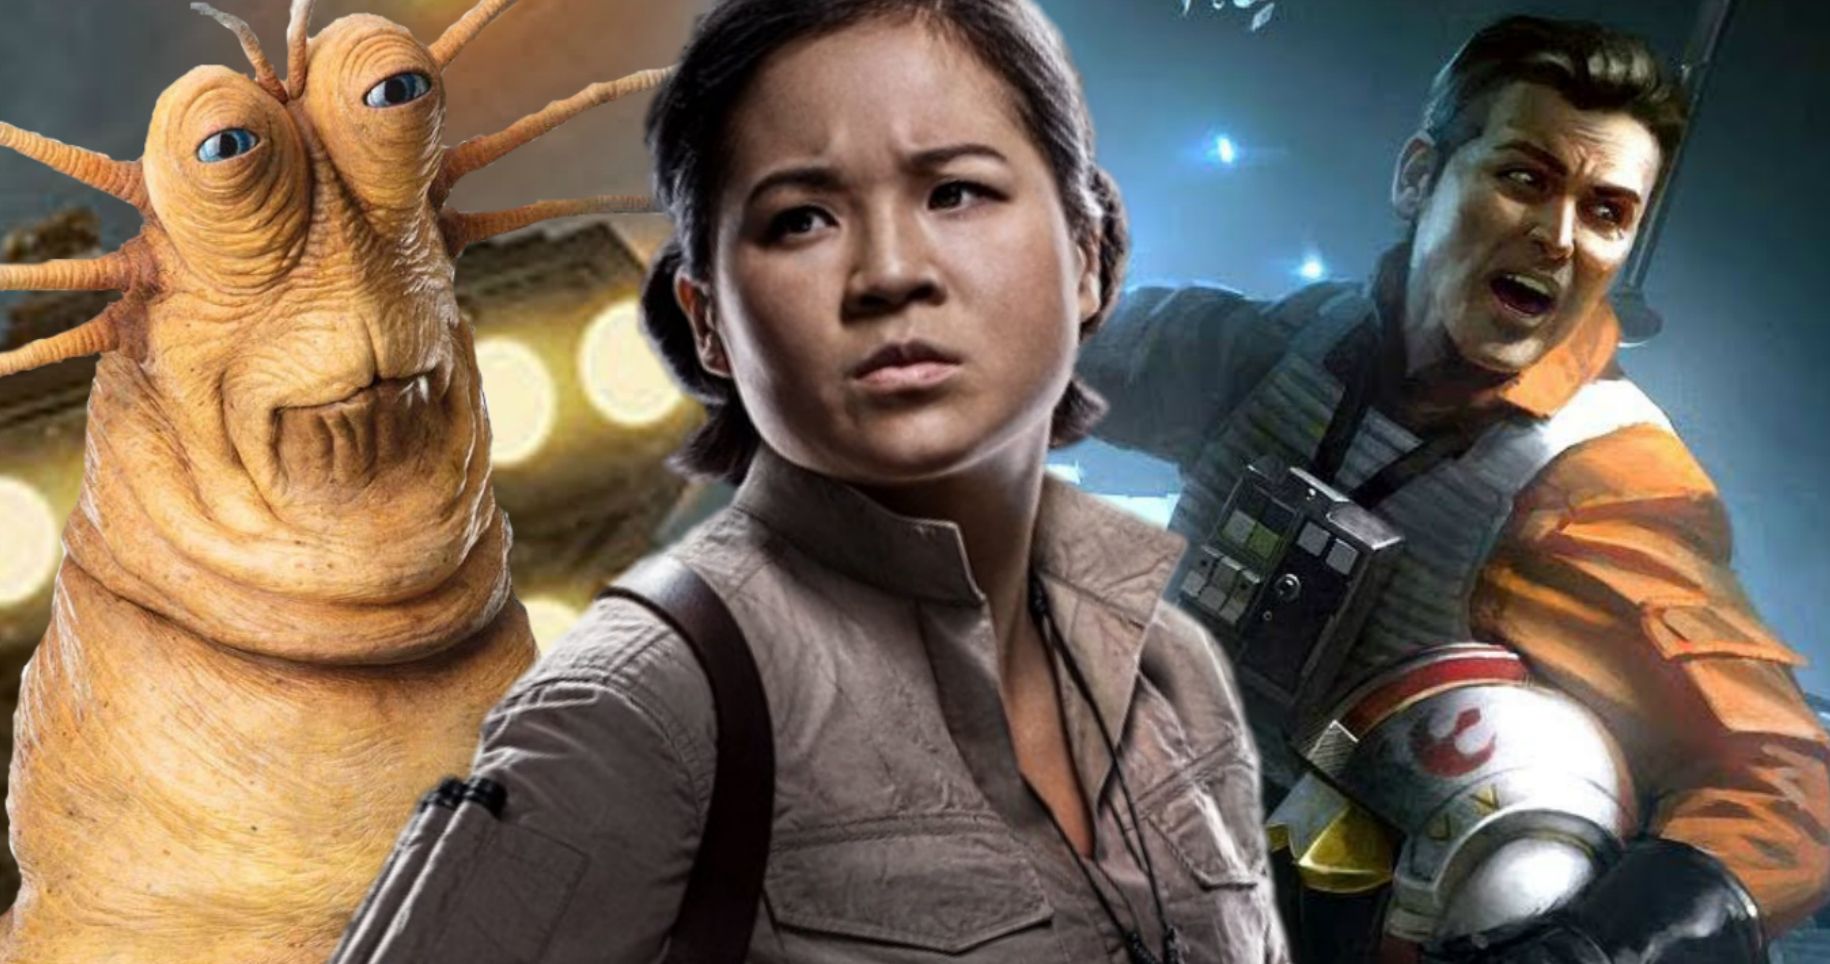 Fan-Proposed Rose Tico Disney+ Series Gets Big Boost from Crazy Rich Asians Director